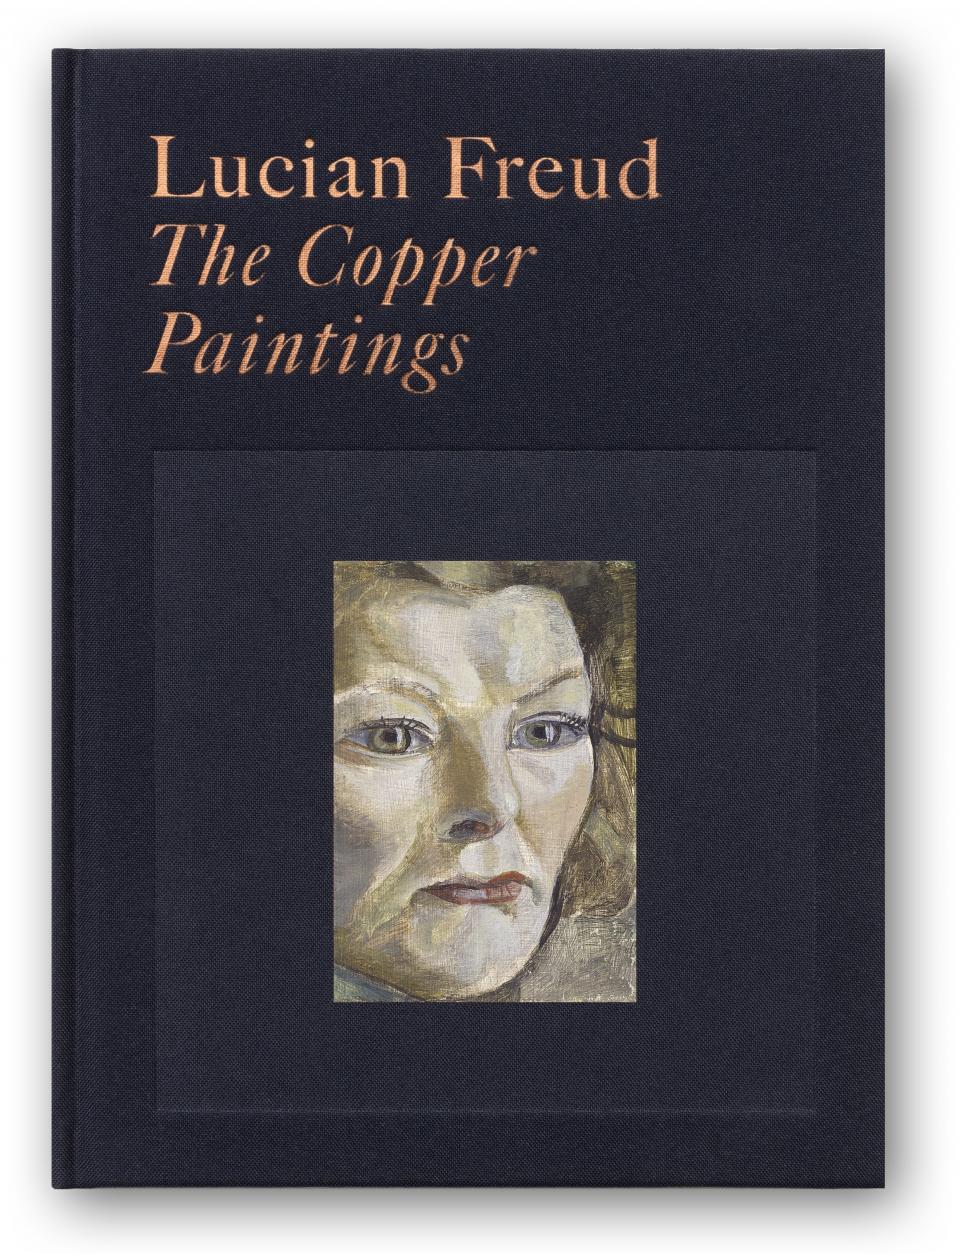 Lucian Freud: The Copper Painting